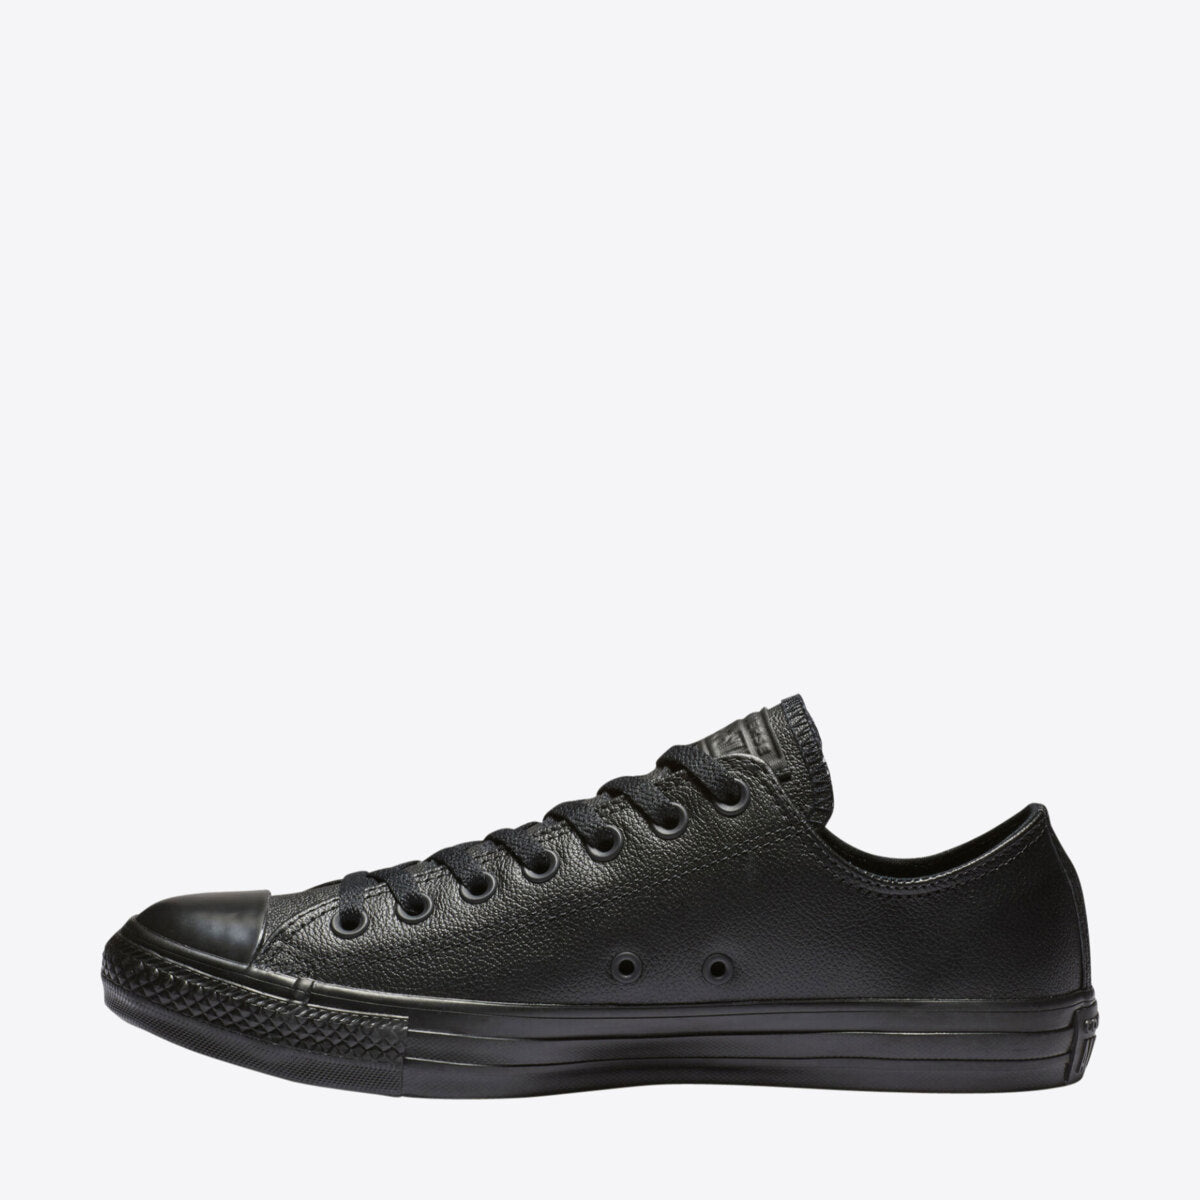 CONVERSE Chuck Taylor All Star Leather Low Black Mono - Image 5